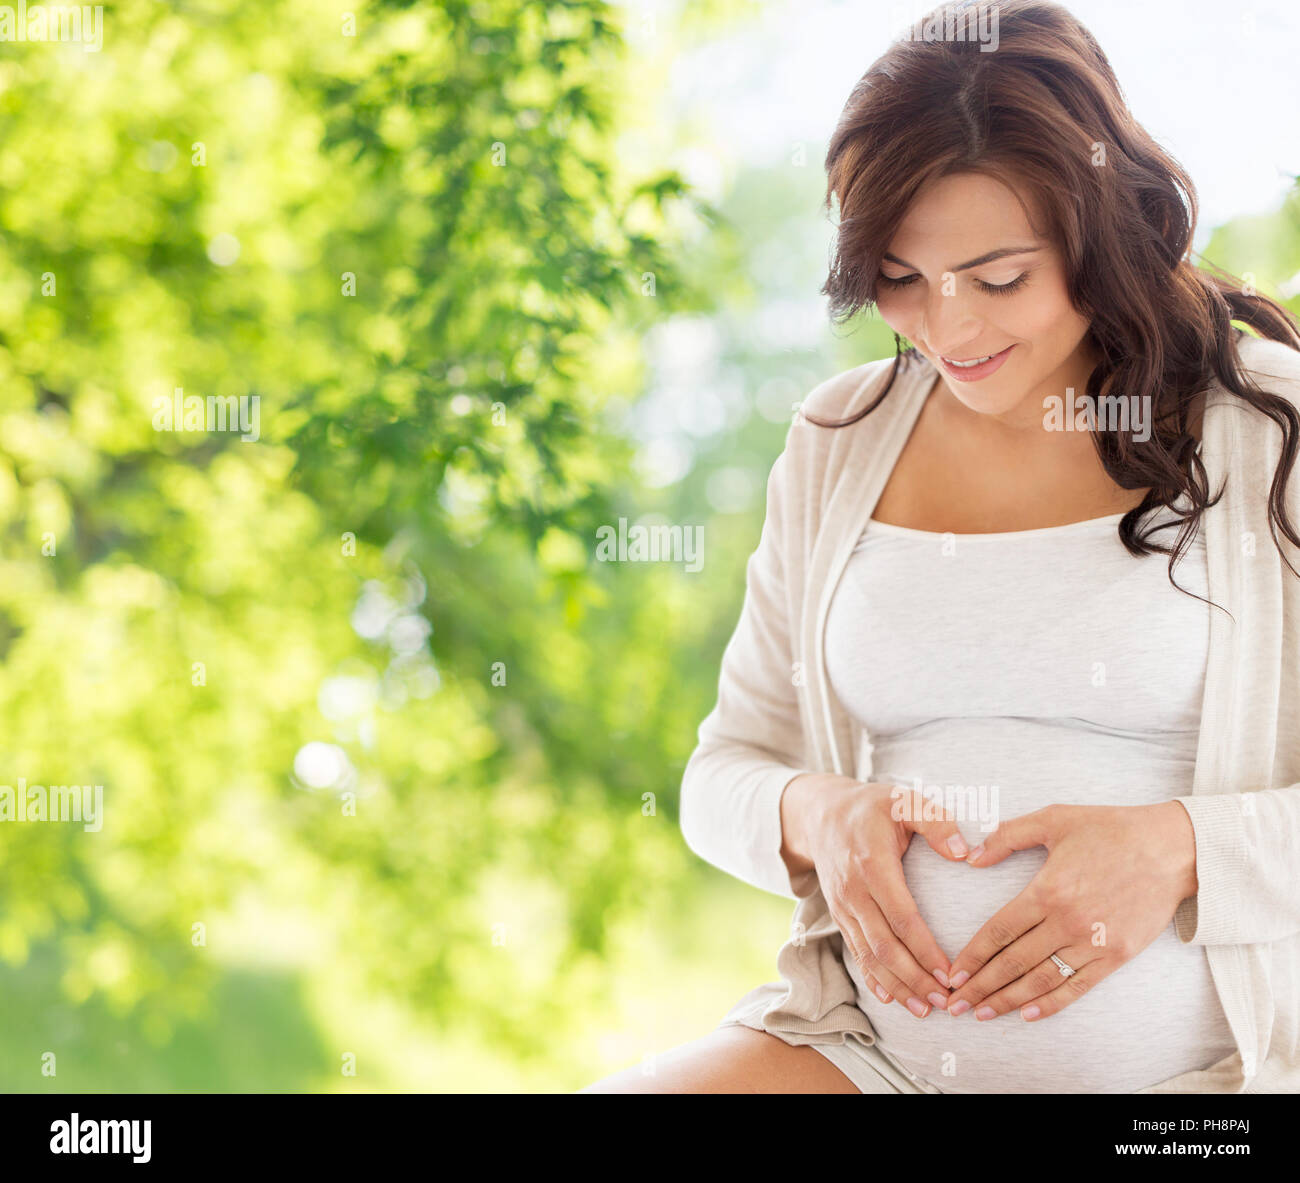 happy pregnant woman making heart gesture Stock Photo